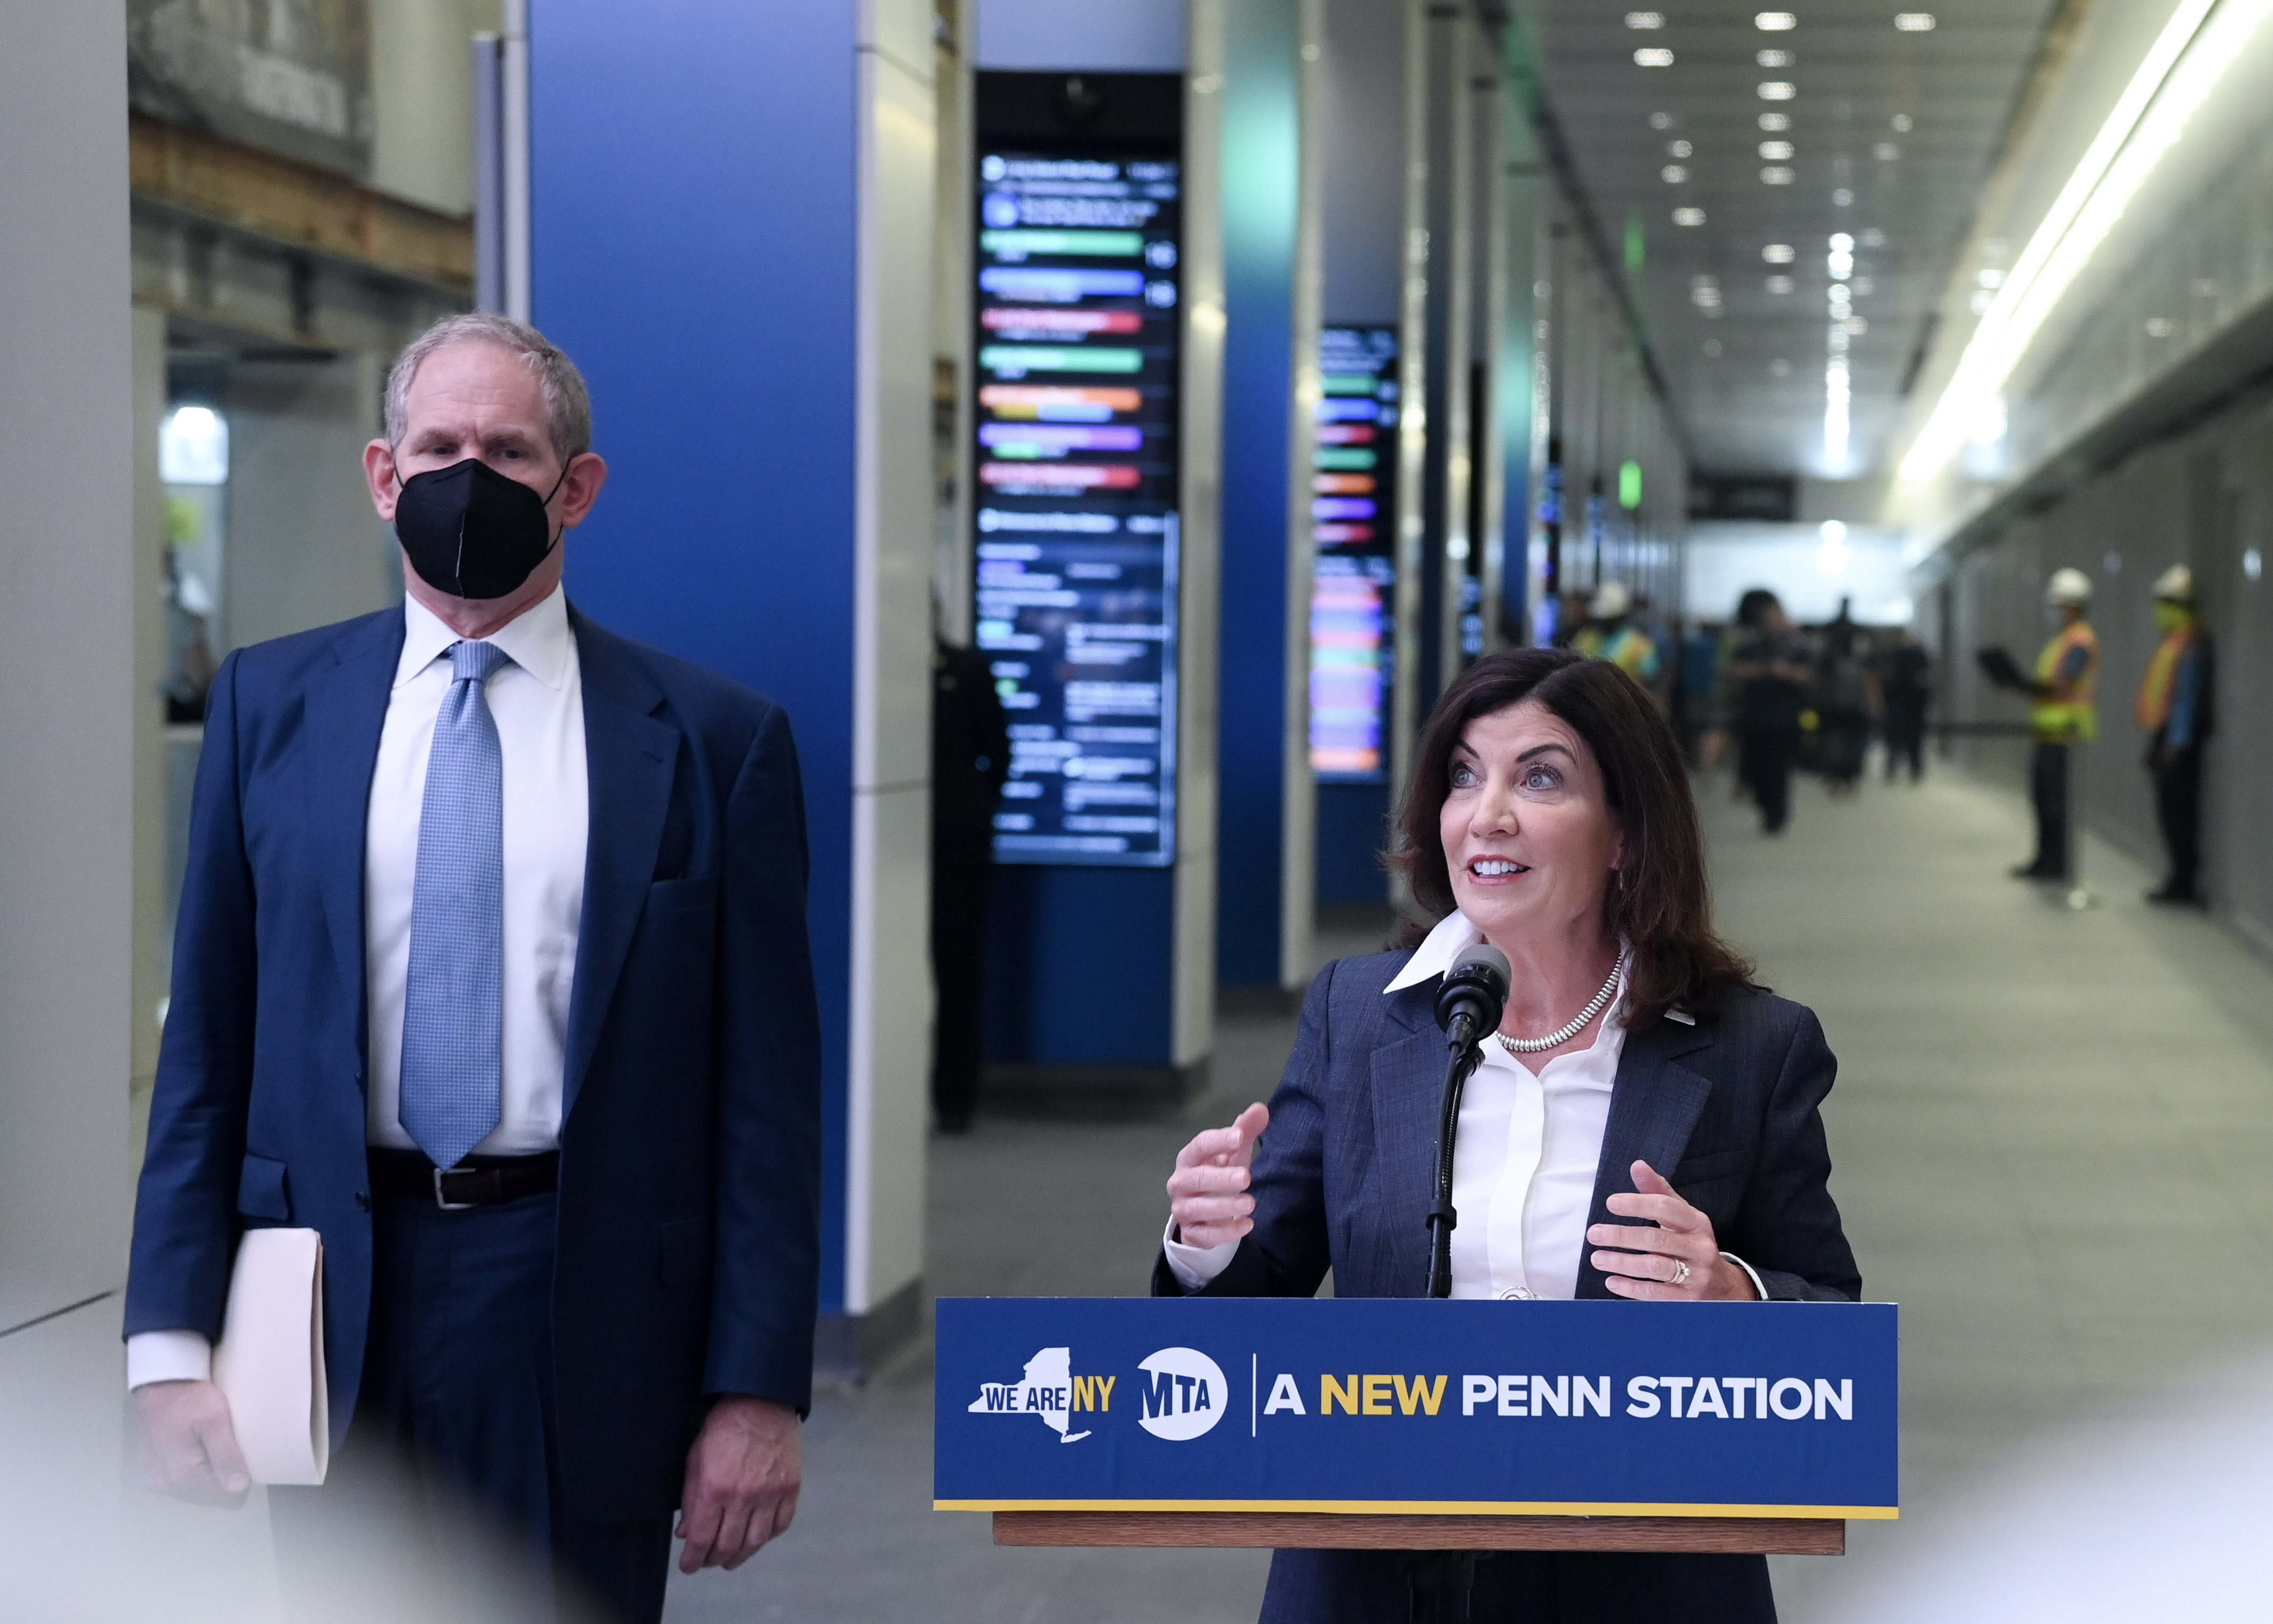 ICYMI: Governor Hochul Reveals Wider, Brighter LIRR Concourse at Penn Station